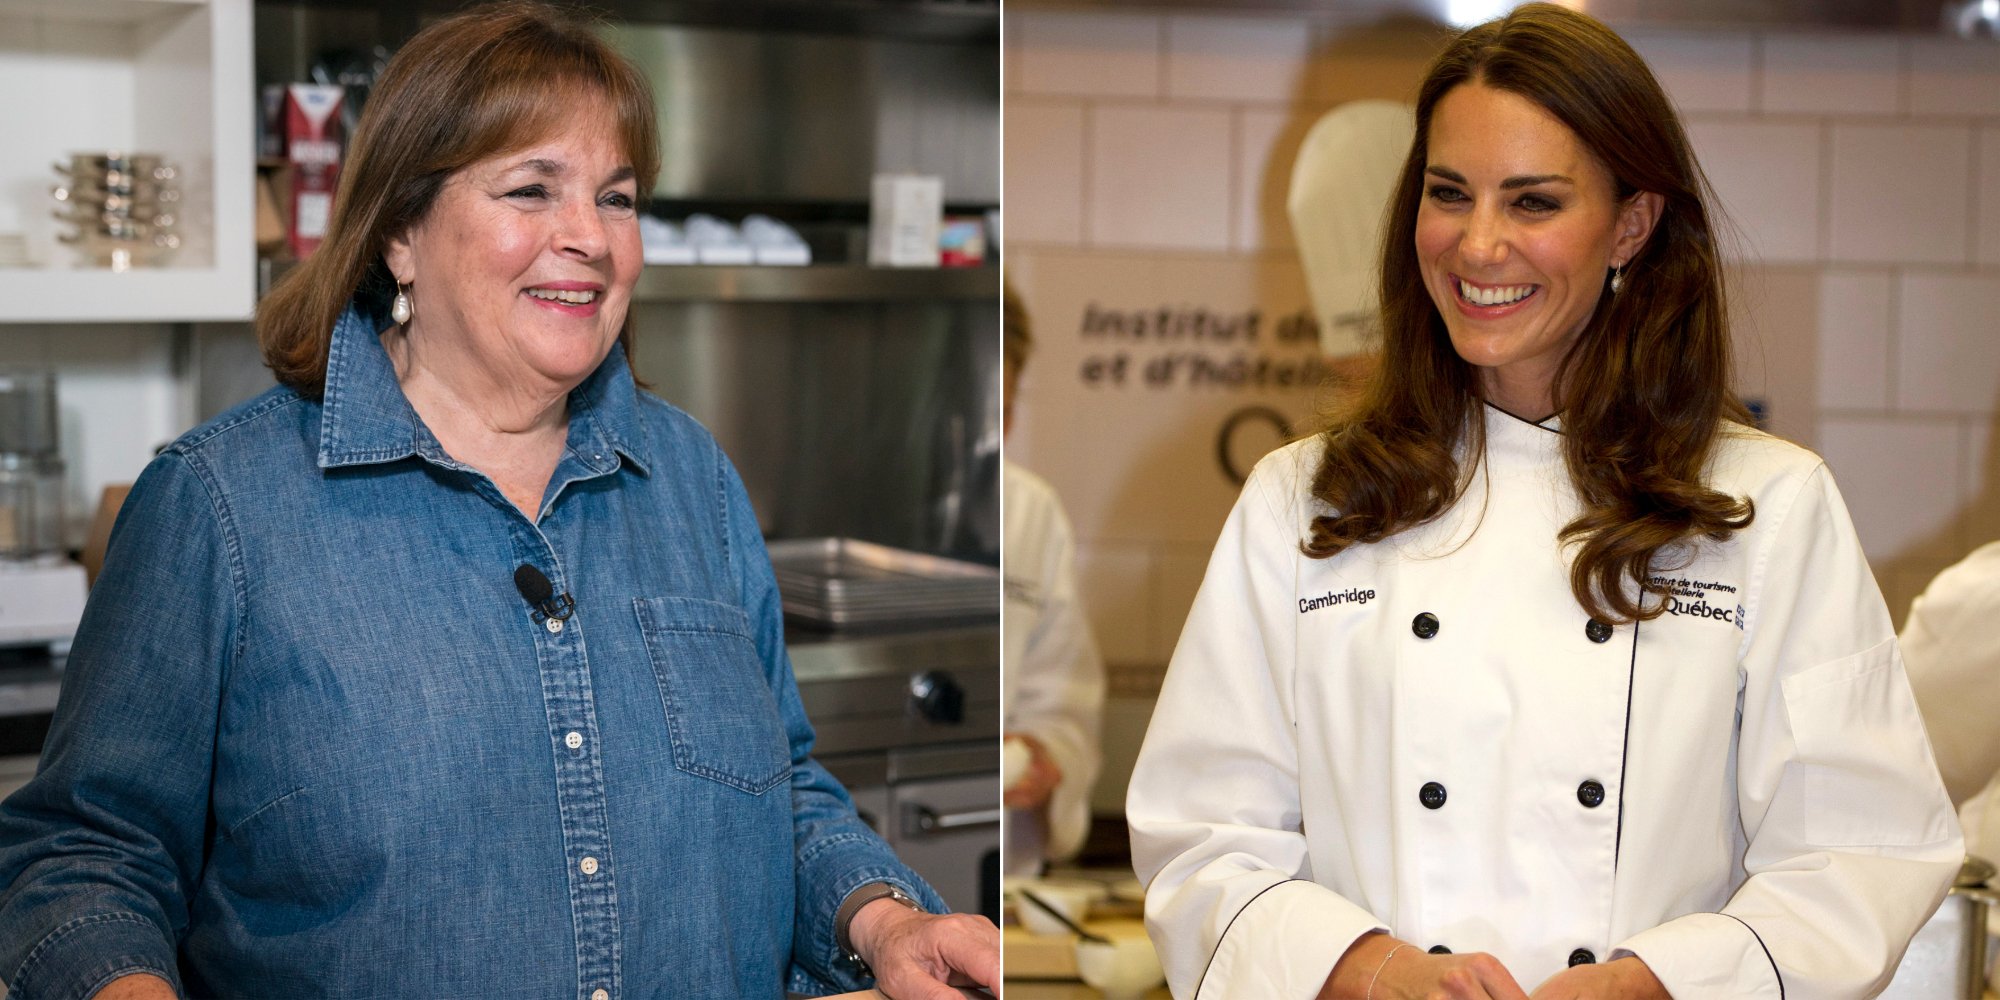 Ina Garten and Kate Middleton in side-by-side photographs.